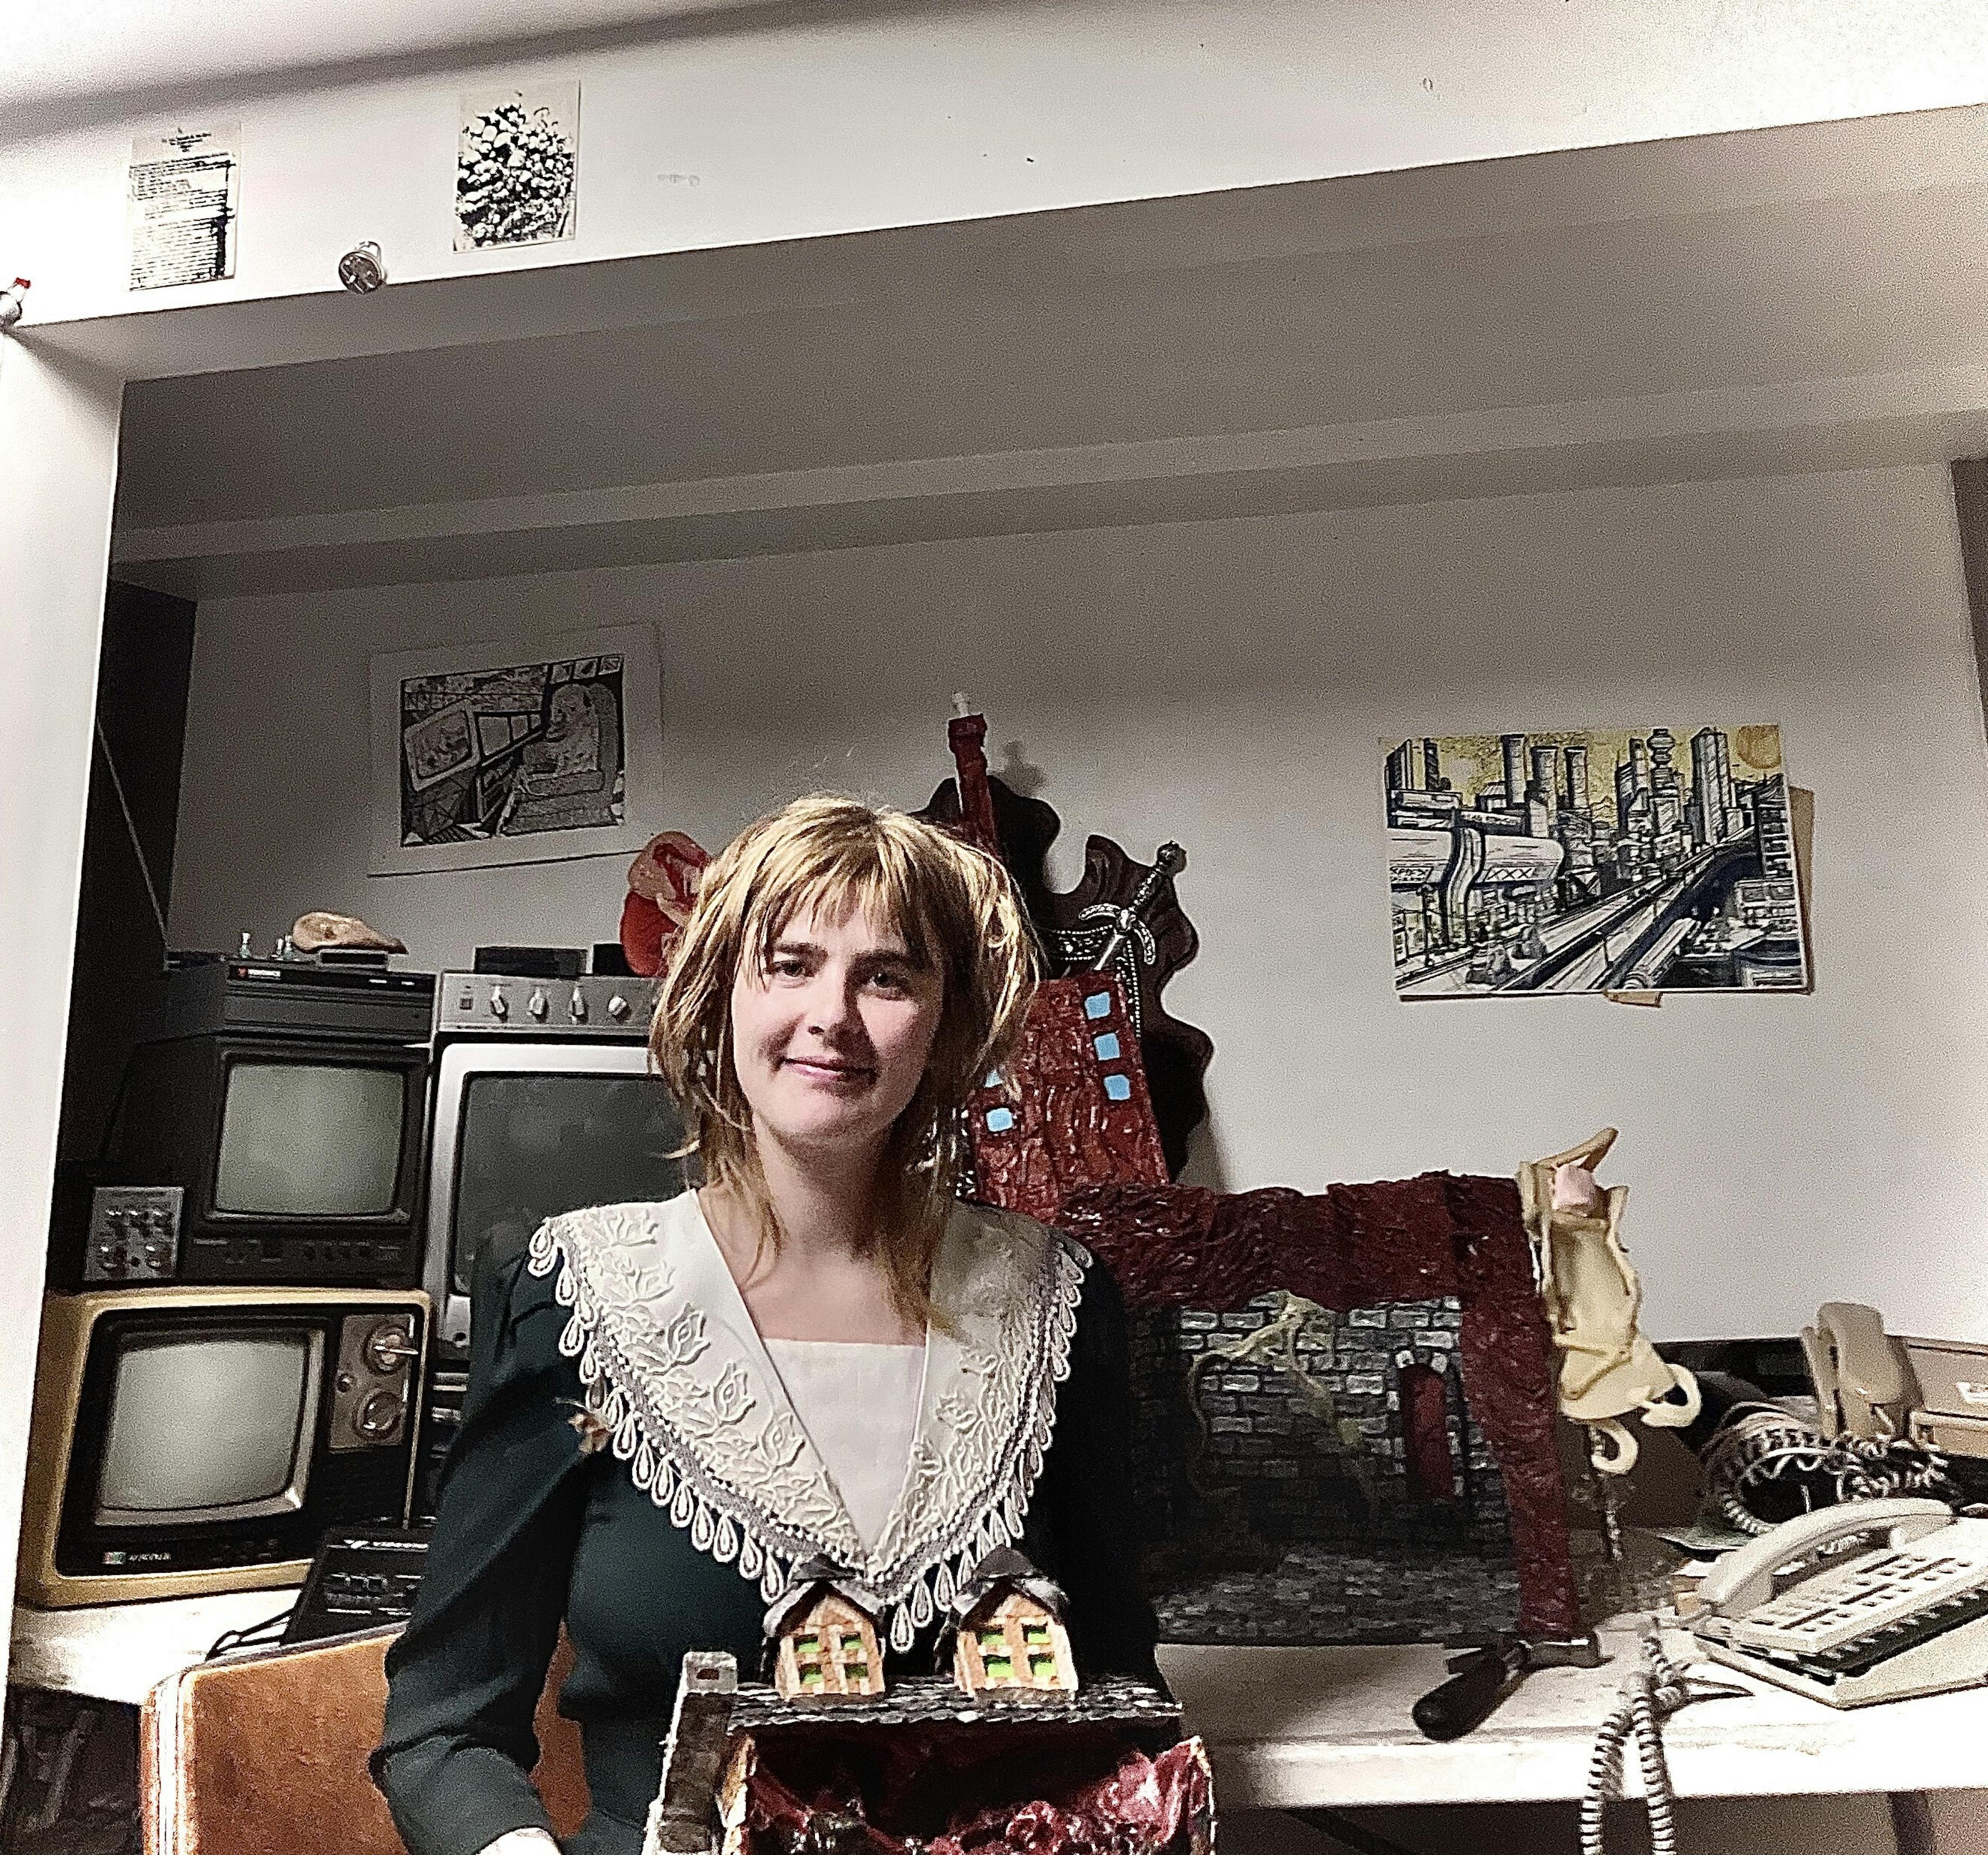 A photograph of Kayla Jane Macneill. She is looking at the camera, holding a small diorama of a house, whilst behind her is a desk cluttered with old crt tvs and telephones. 

She has shoulder length blonde hair, brown eyes, and is wearing a lacy-collared sailor suit. 